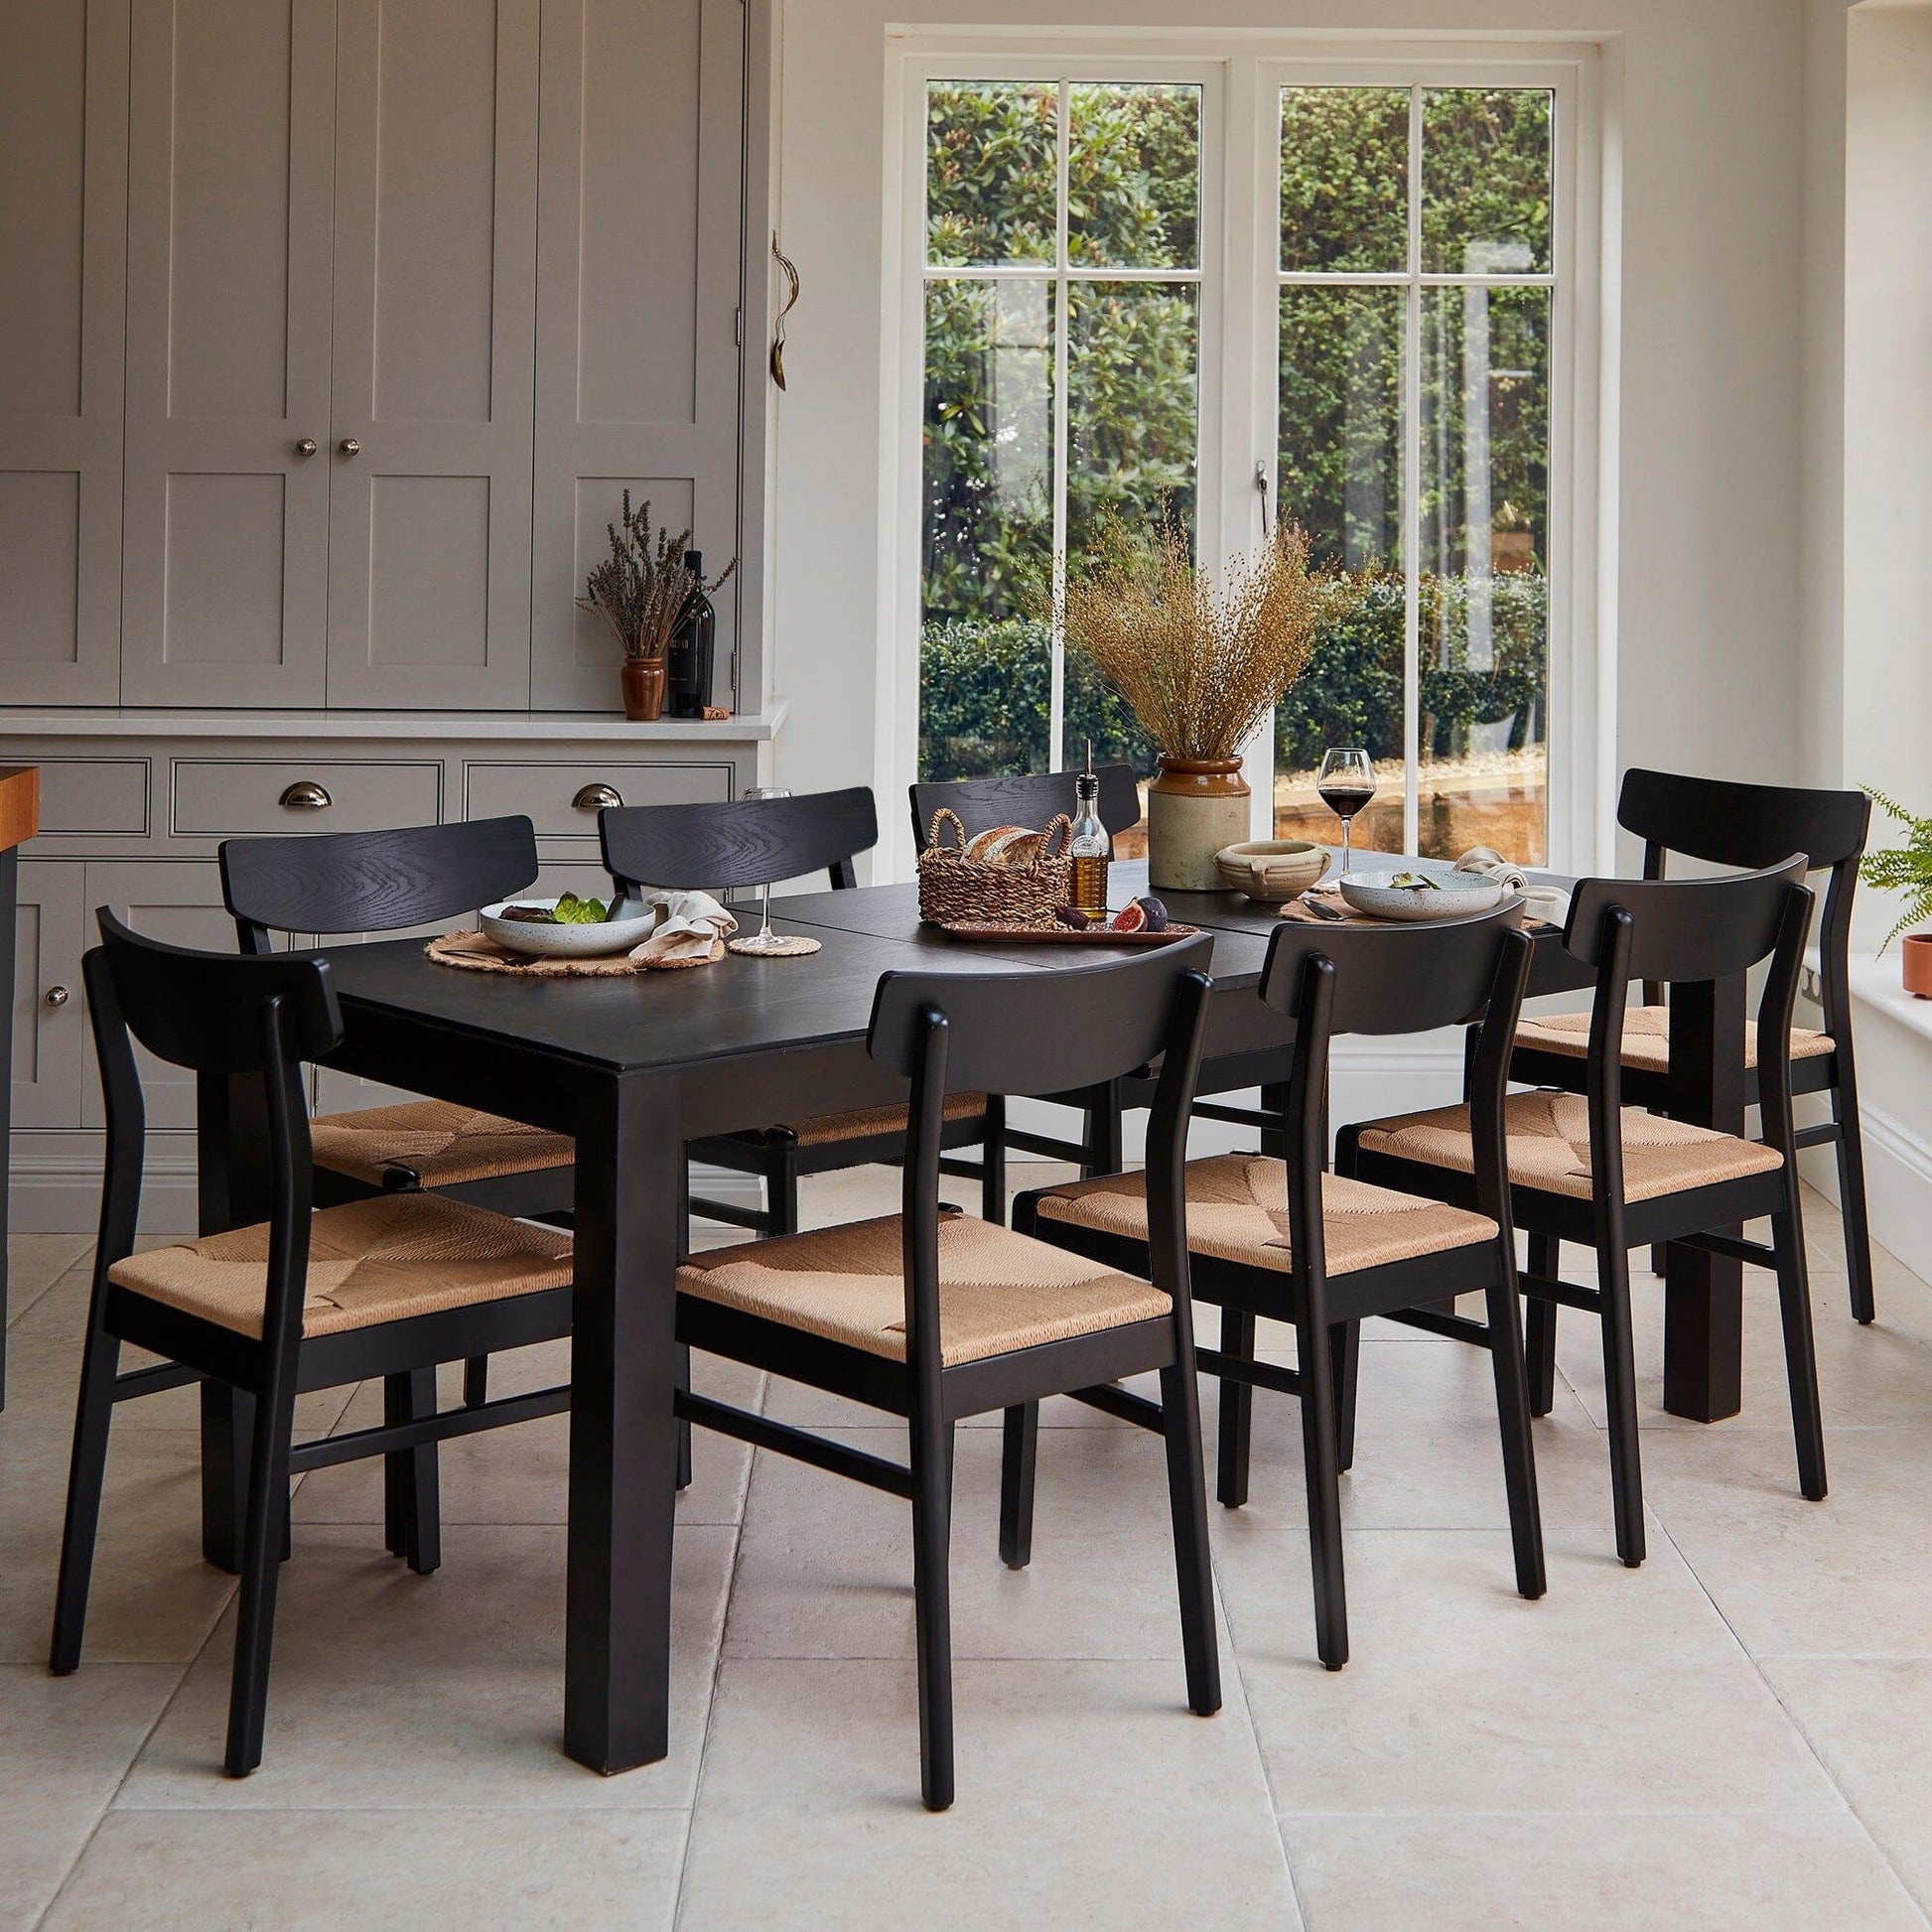 Magnus Black Extendable Dining Set with Woven Chairs - Laura James